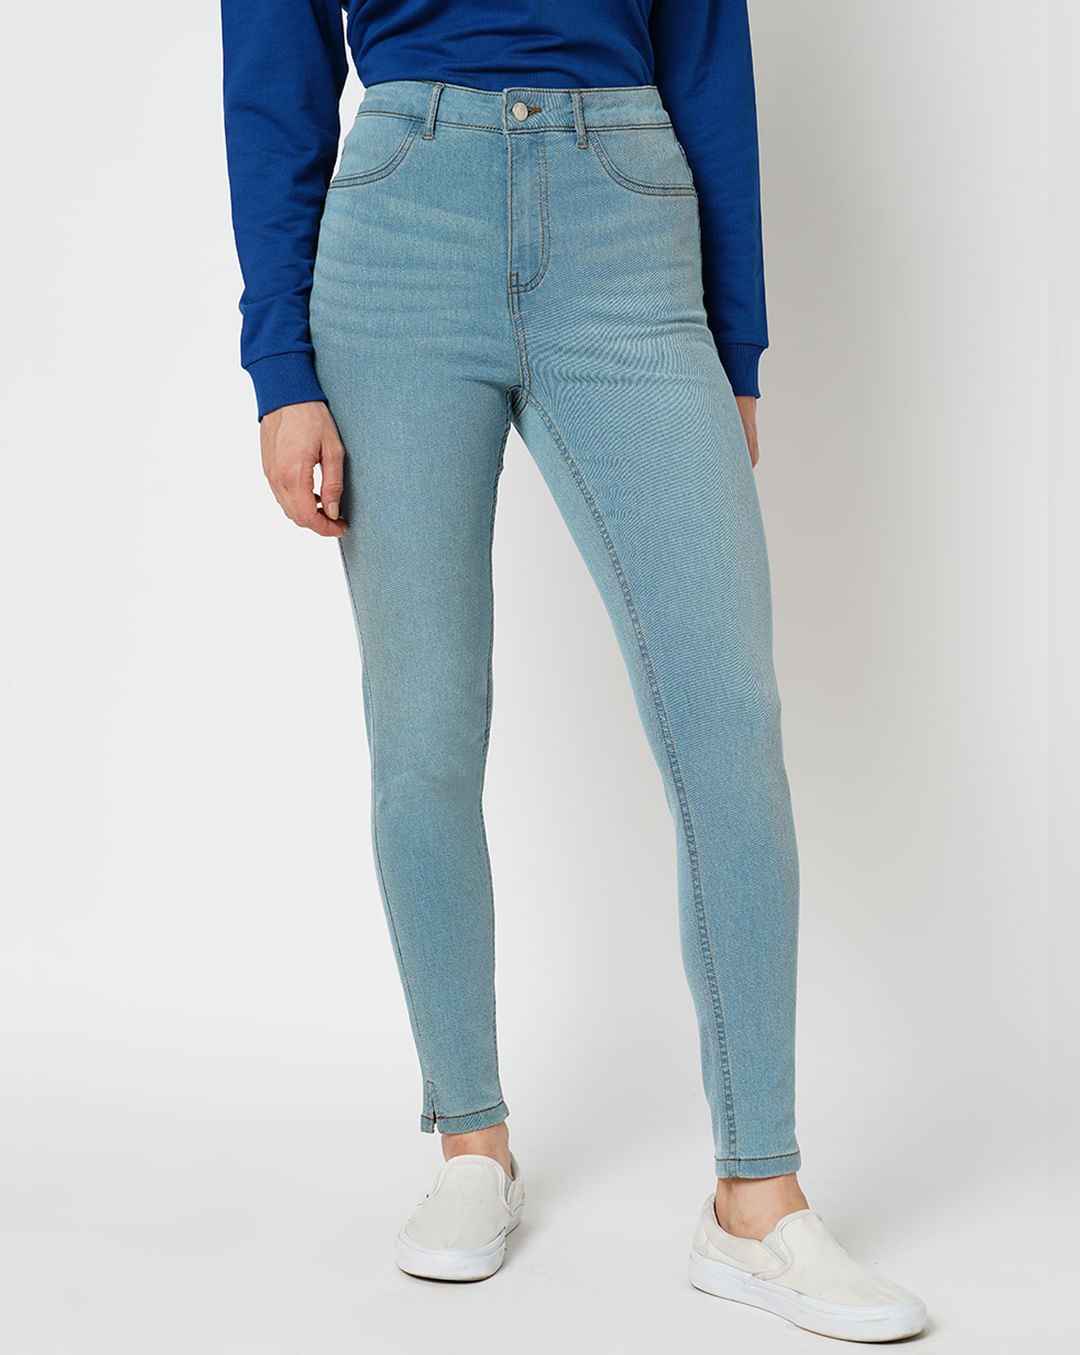 Blue Denim Comfort lady Fashion Jeggings, Casual Wear, Slim Fit at Rs 999  in Mumbai